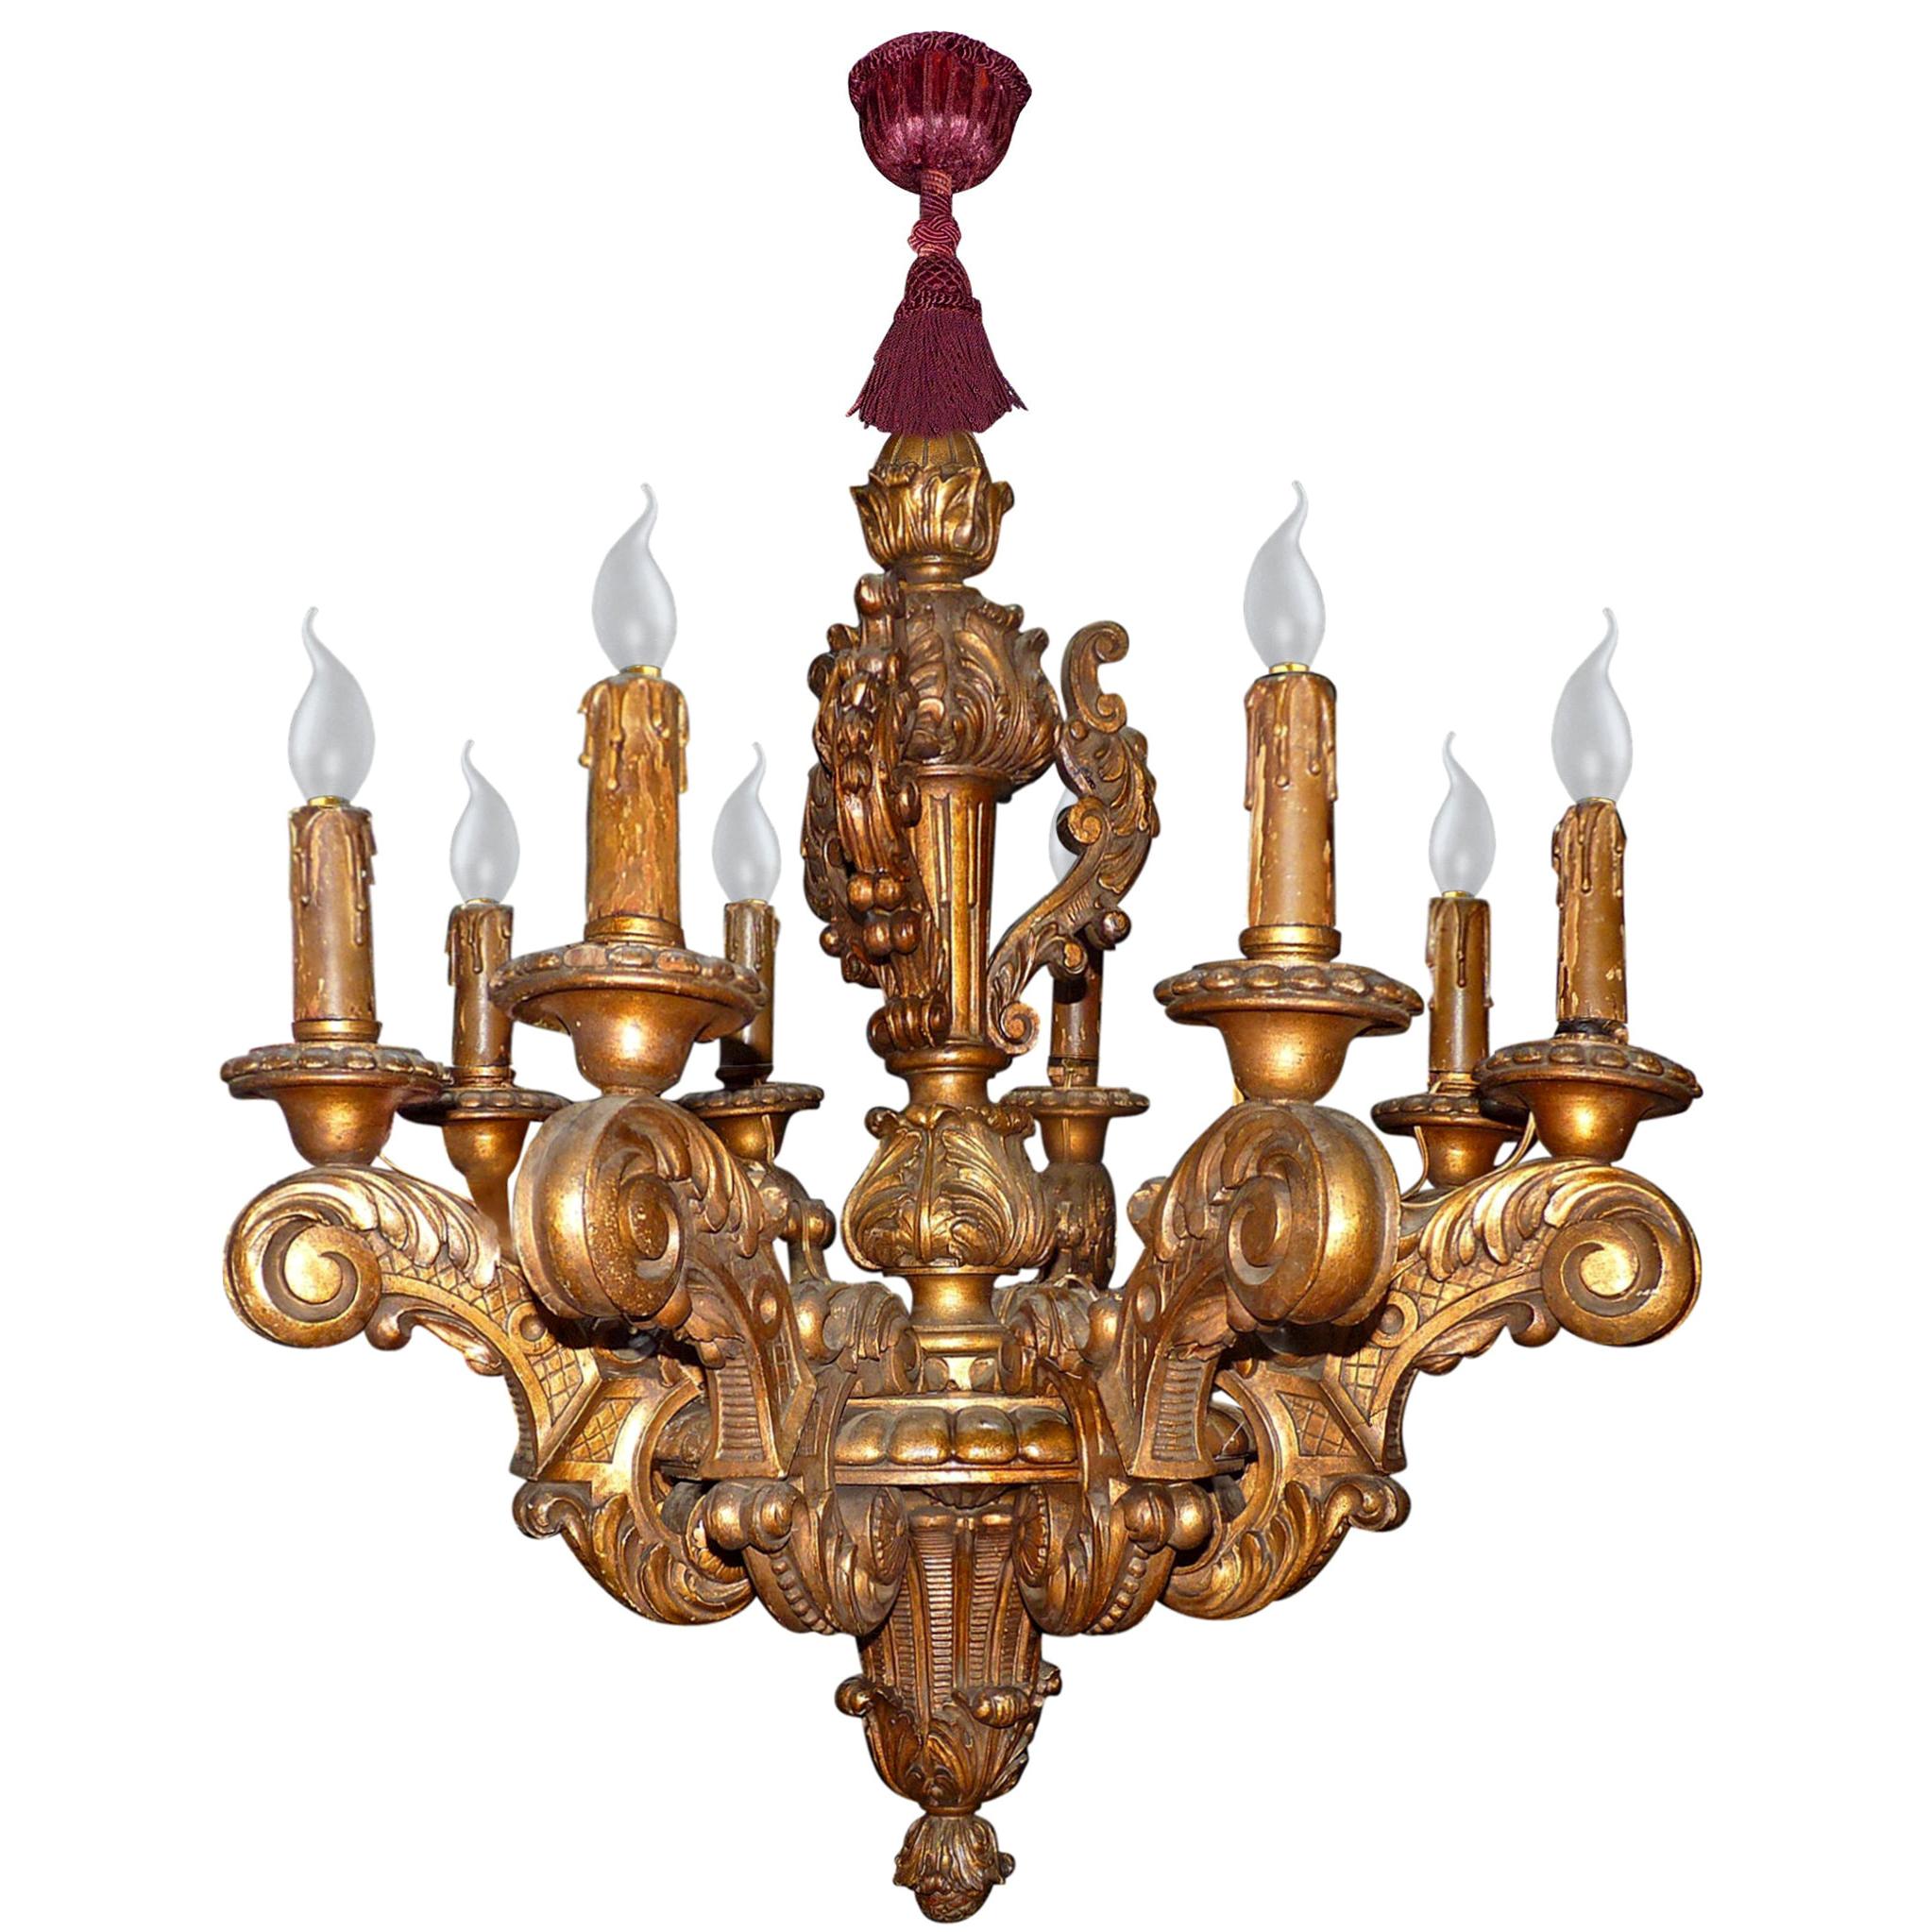 Massive French Louis XV Baroque Gilt Carved Wood 8-Light Chandelier 19th Century